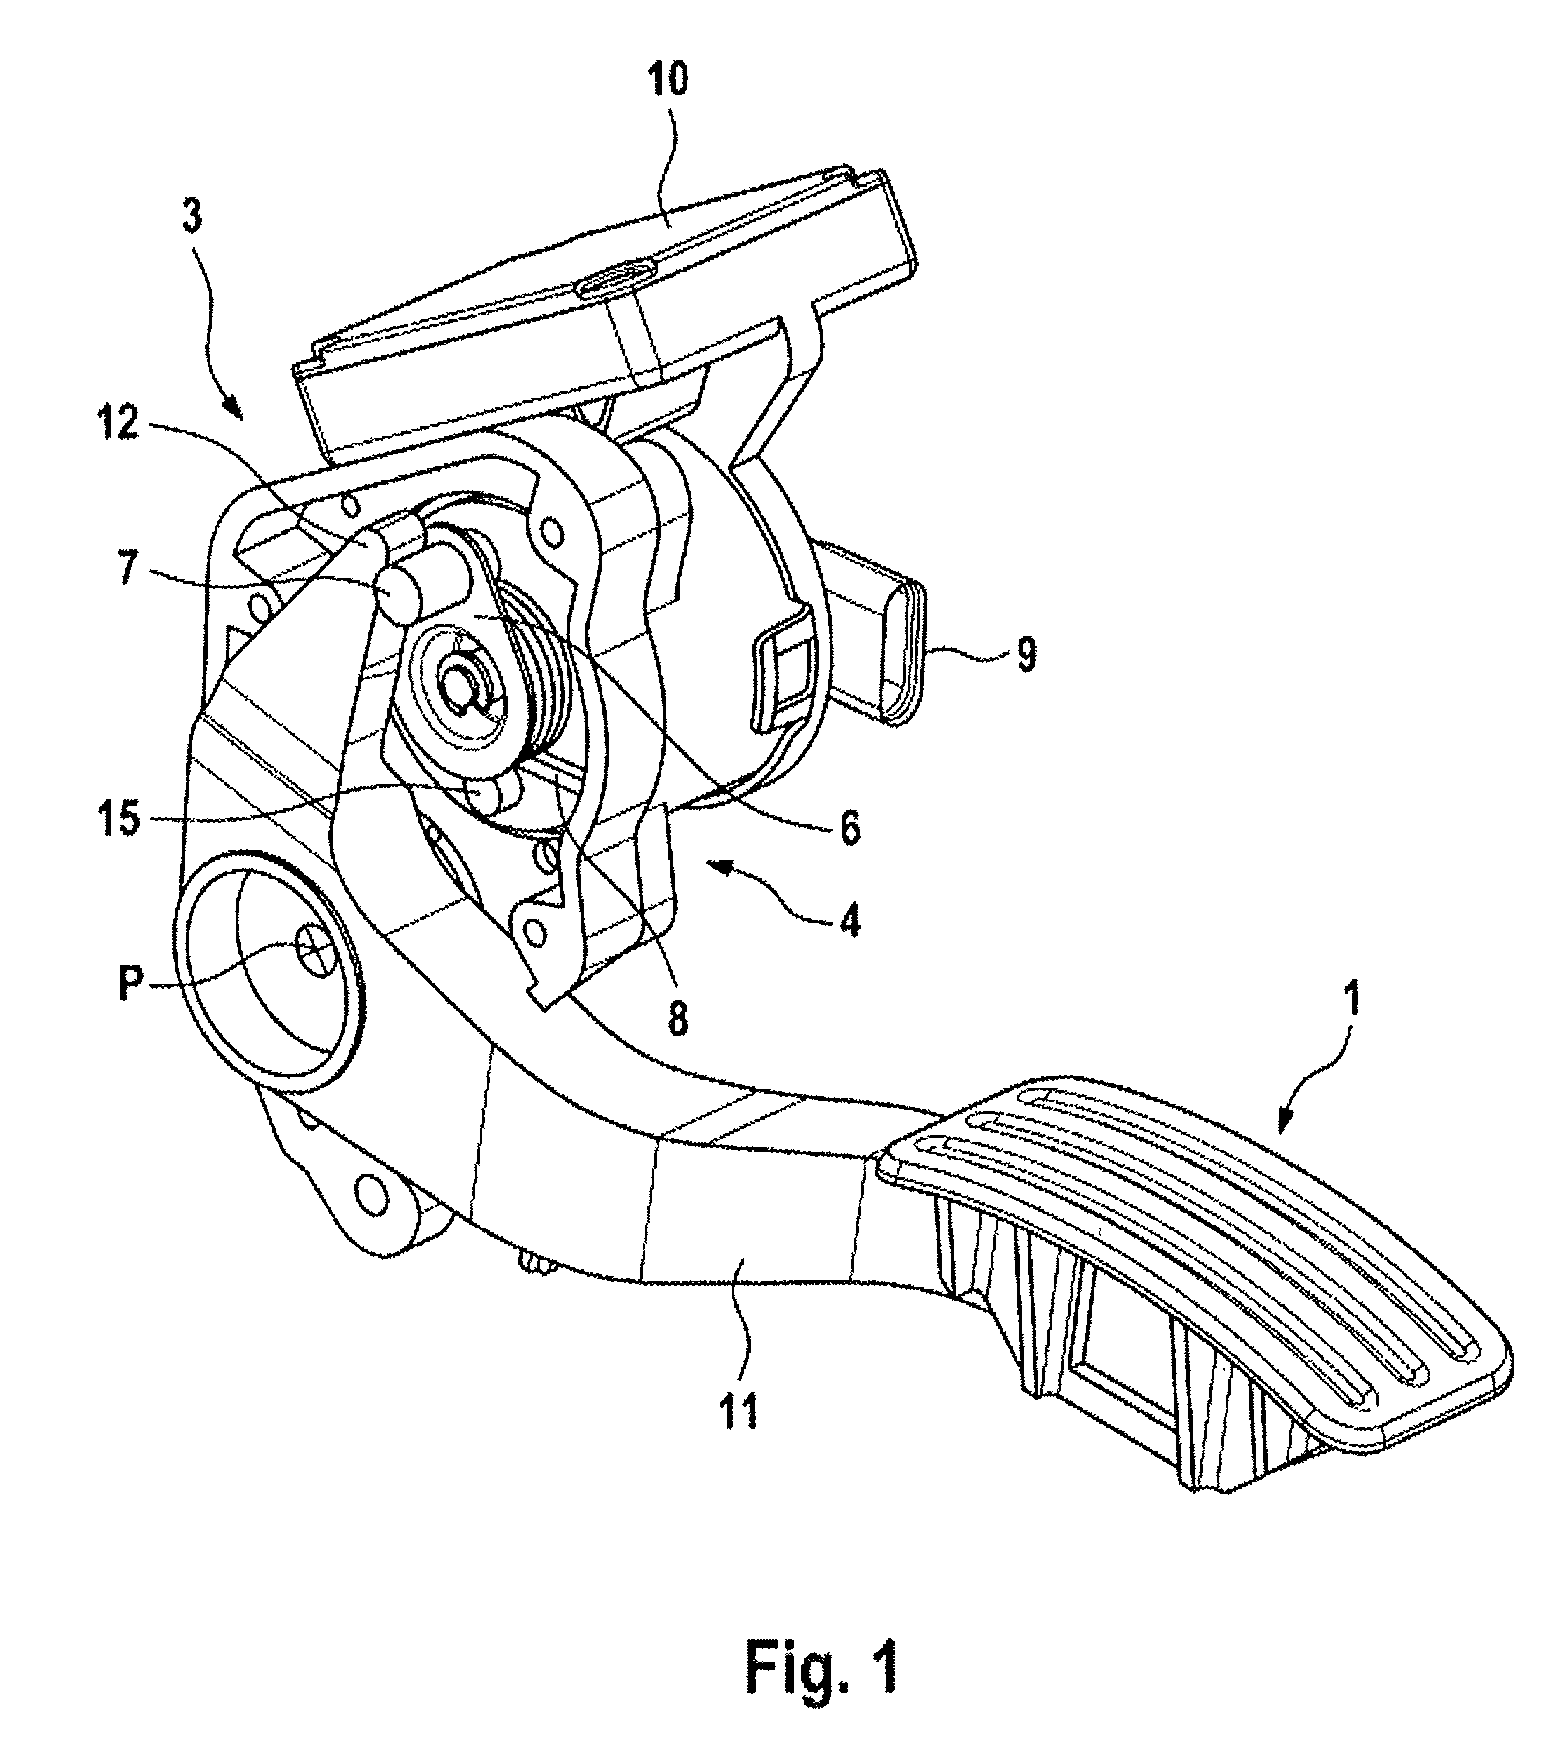 Method for operating an accelerator pedal unit for motor vehicles